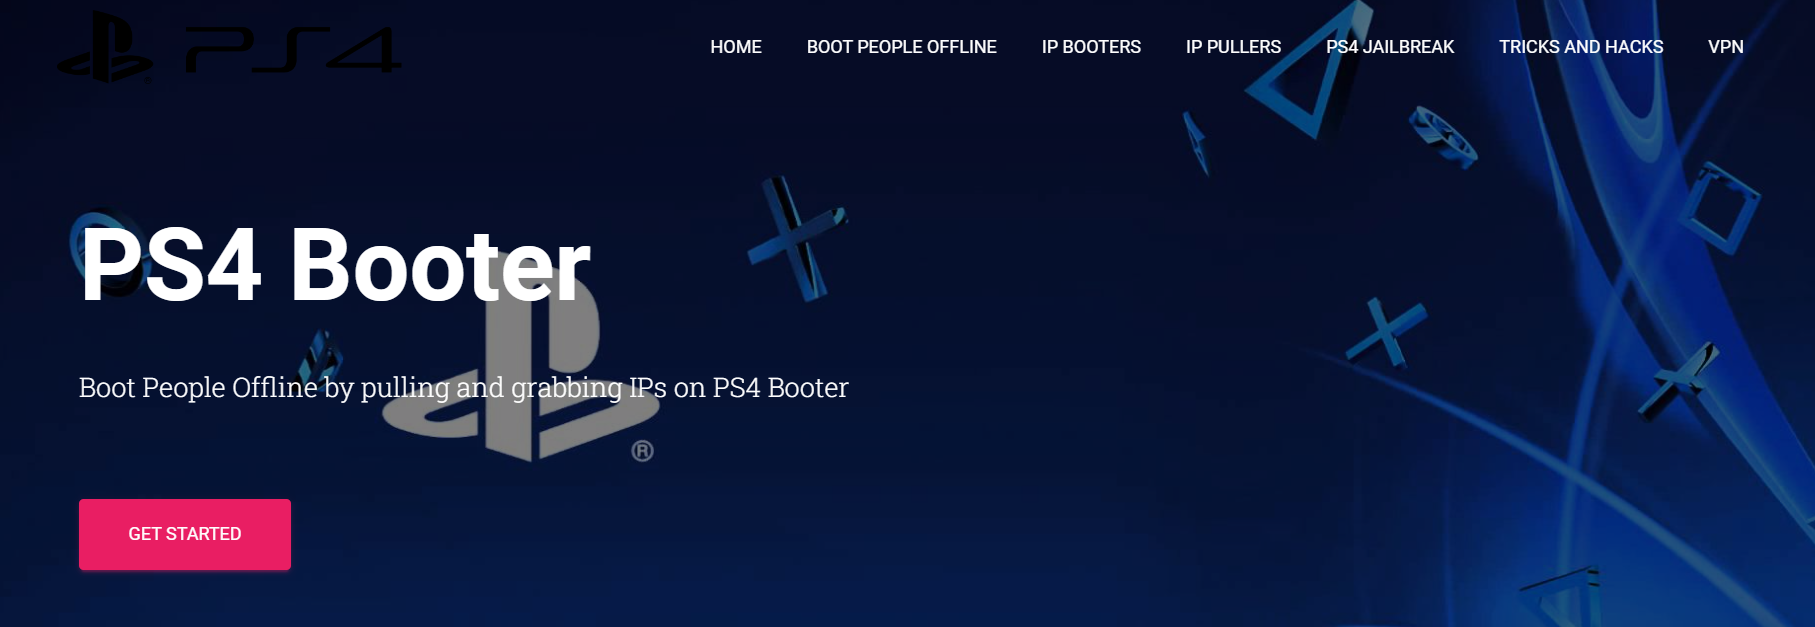 PS4 Booter